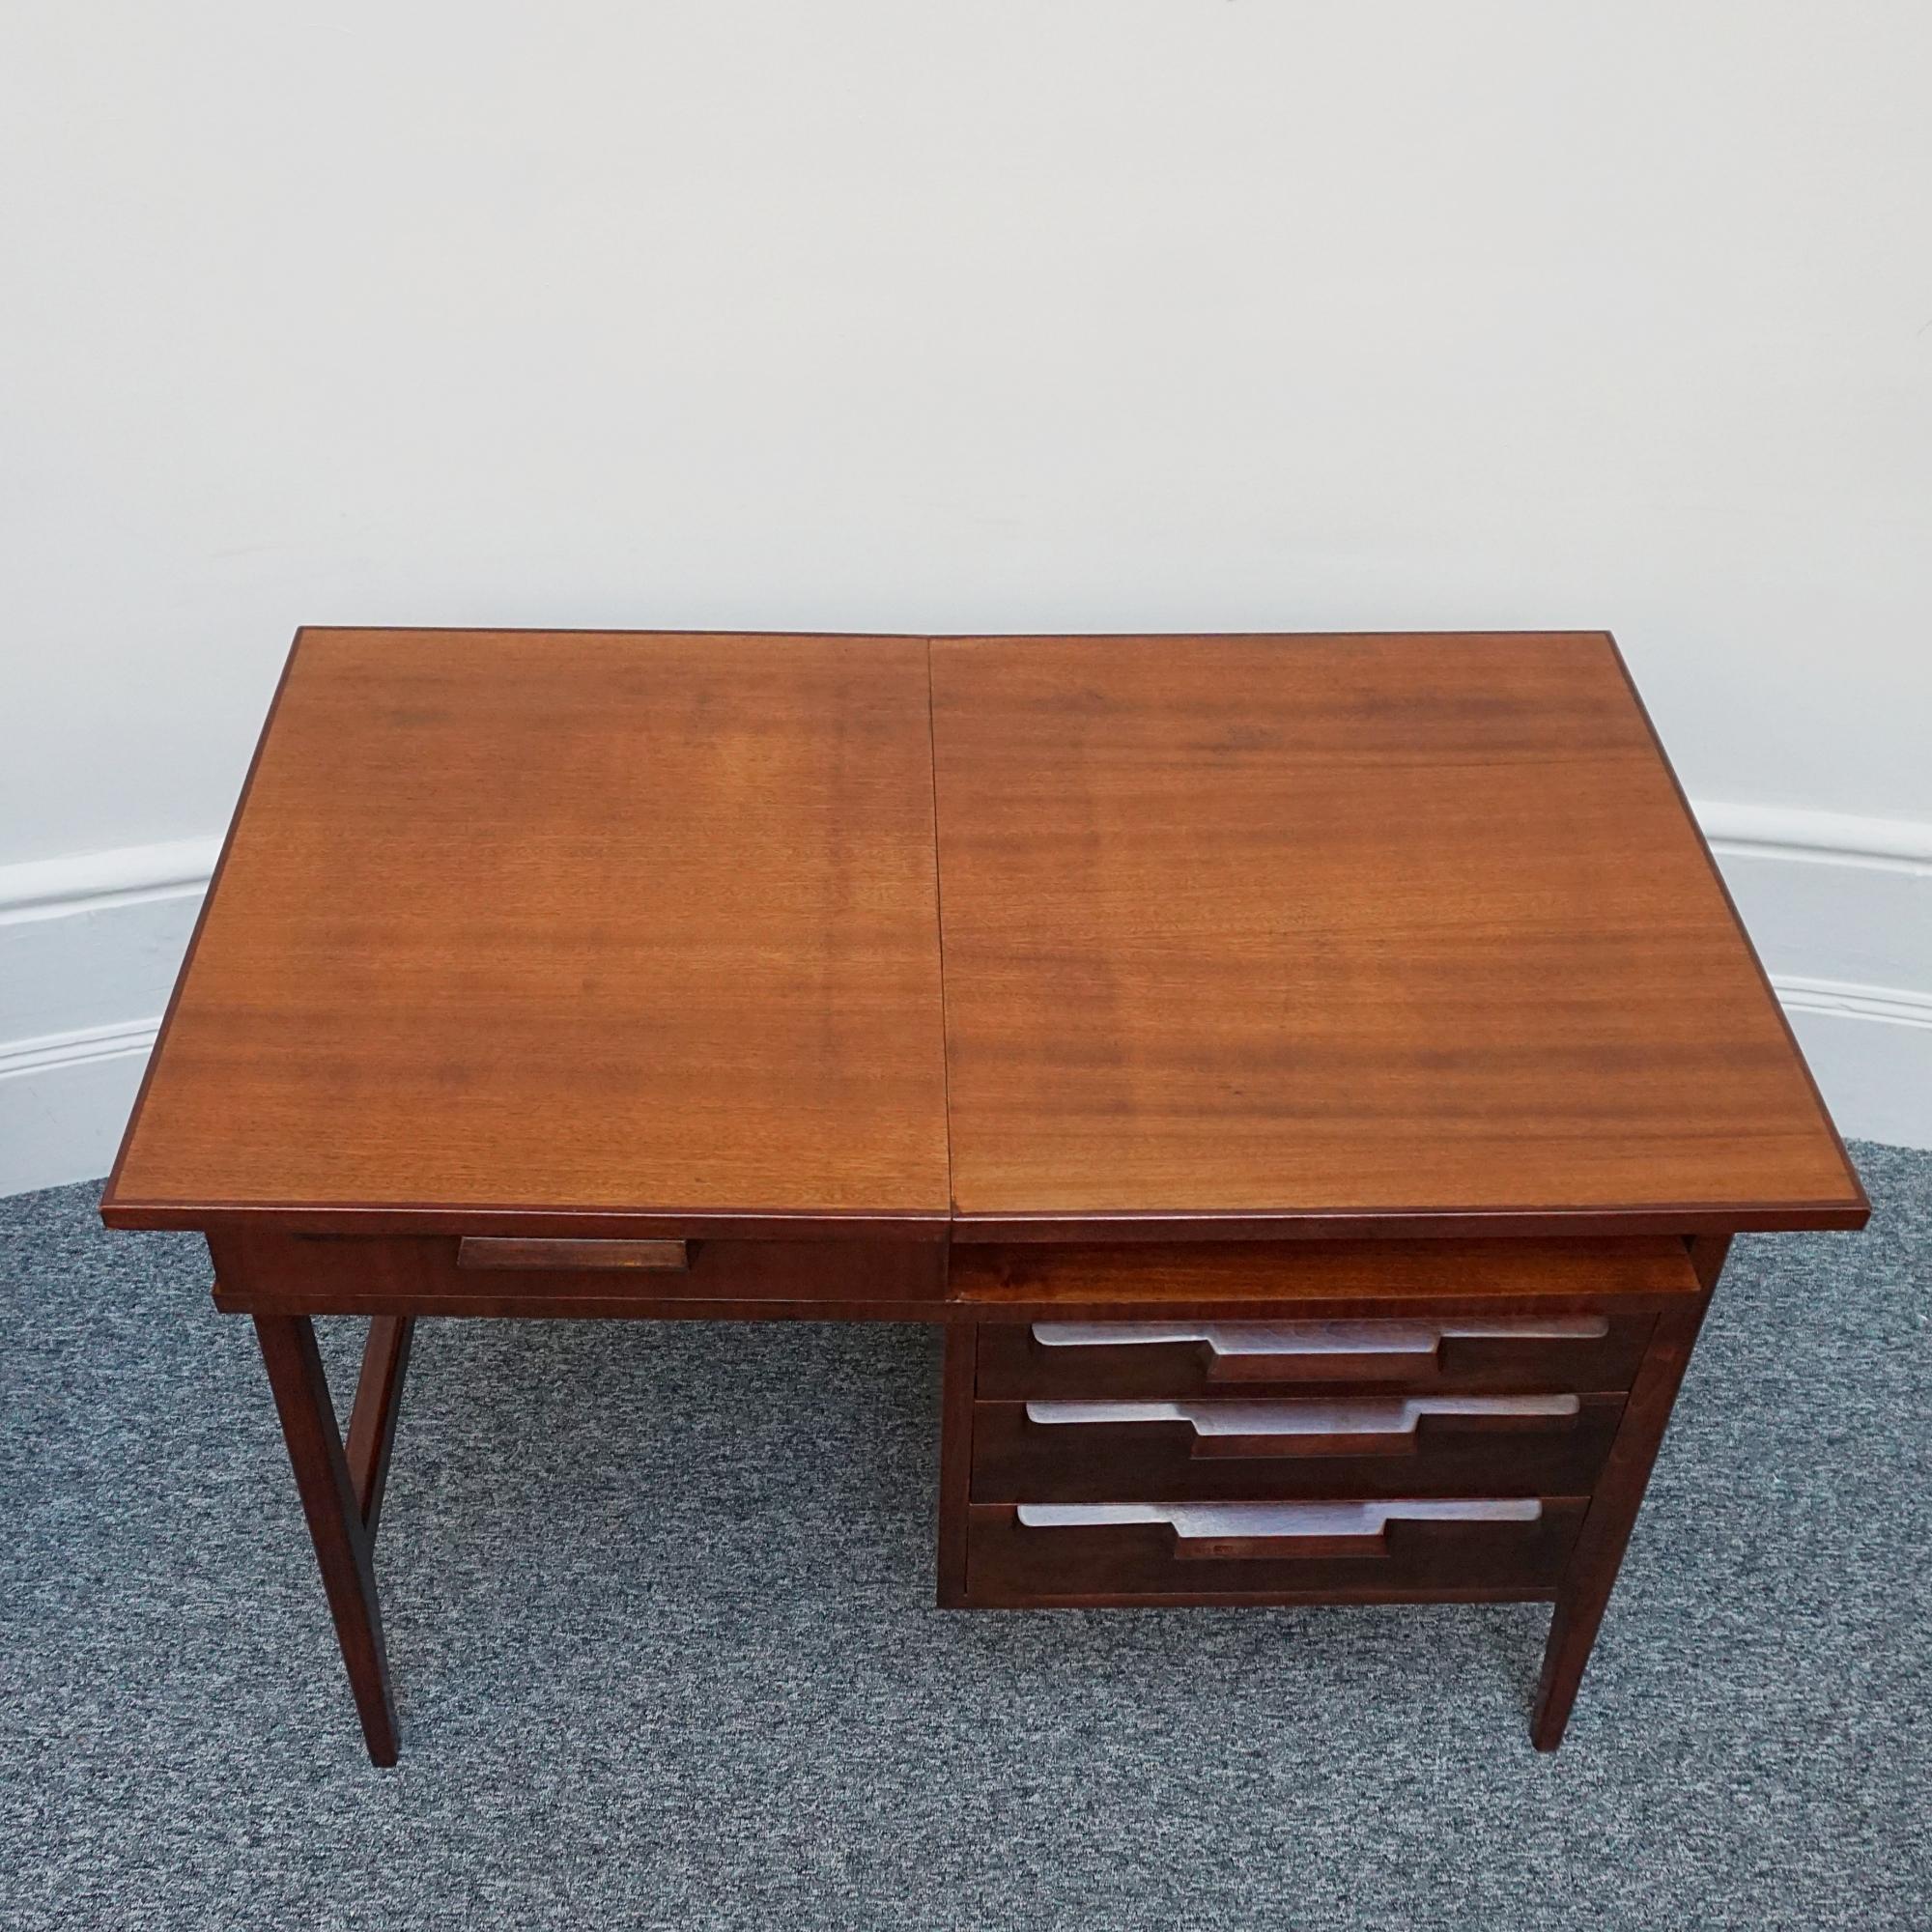 Italian A Mid-Century Writing Desk Attributed to Gio Ponti For Sale